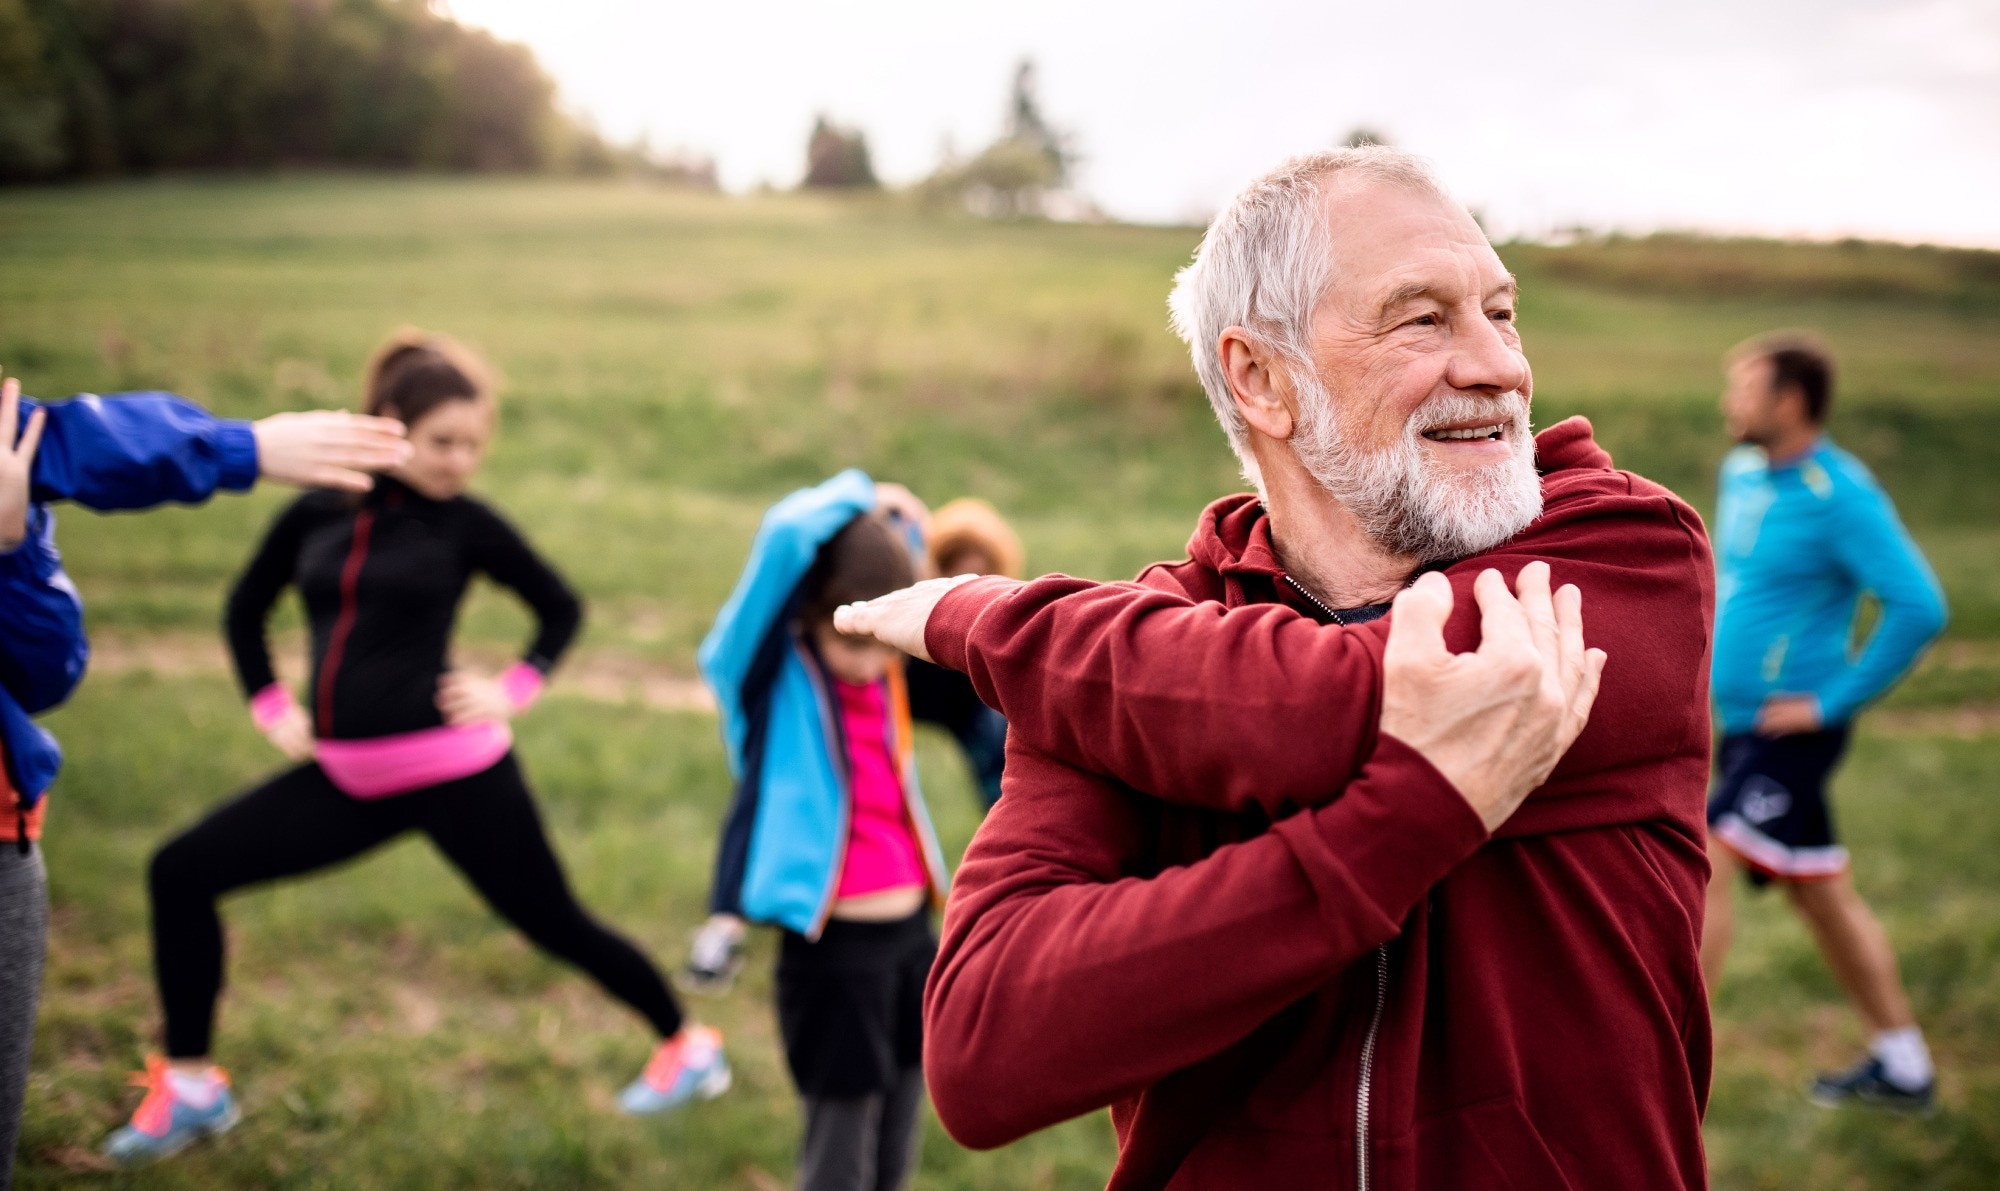 Study: Lung aerosol particle emission increases with age at rest and during exercise. Image Credit: GroundPicture/Shutterstock.com